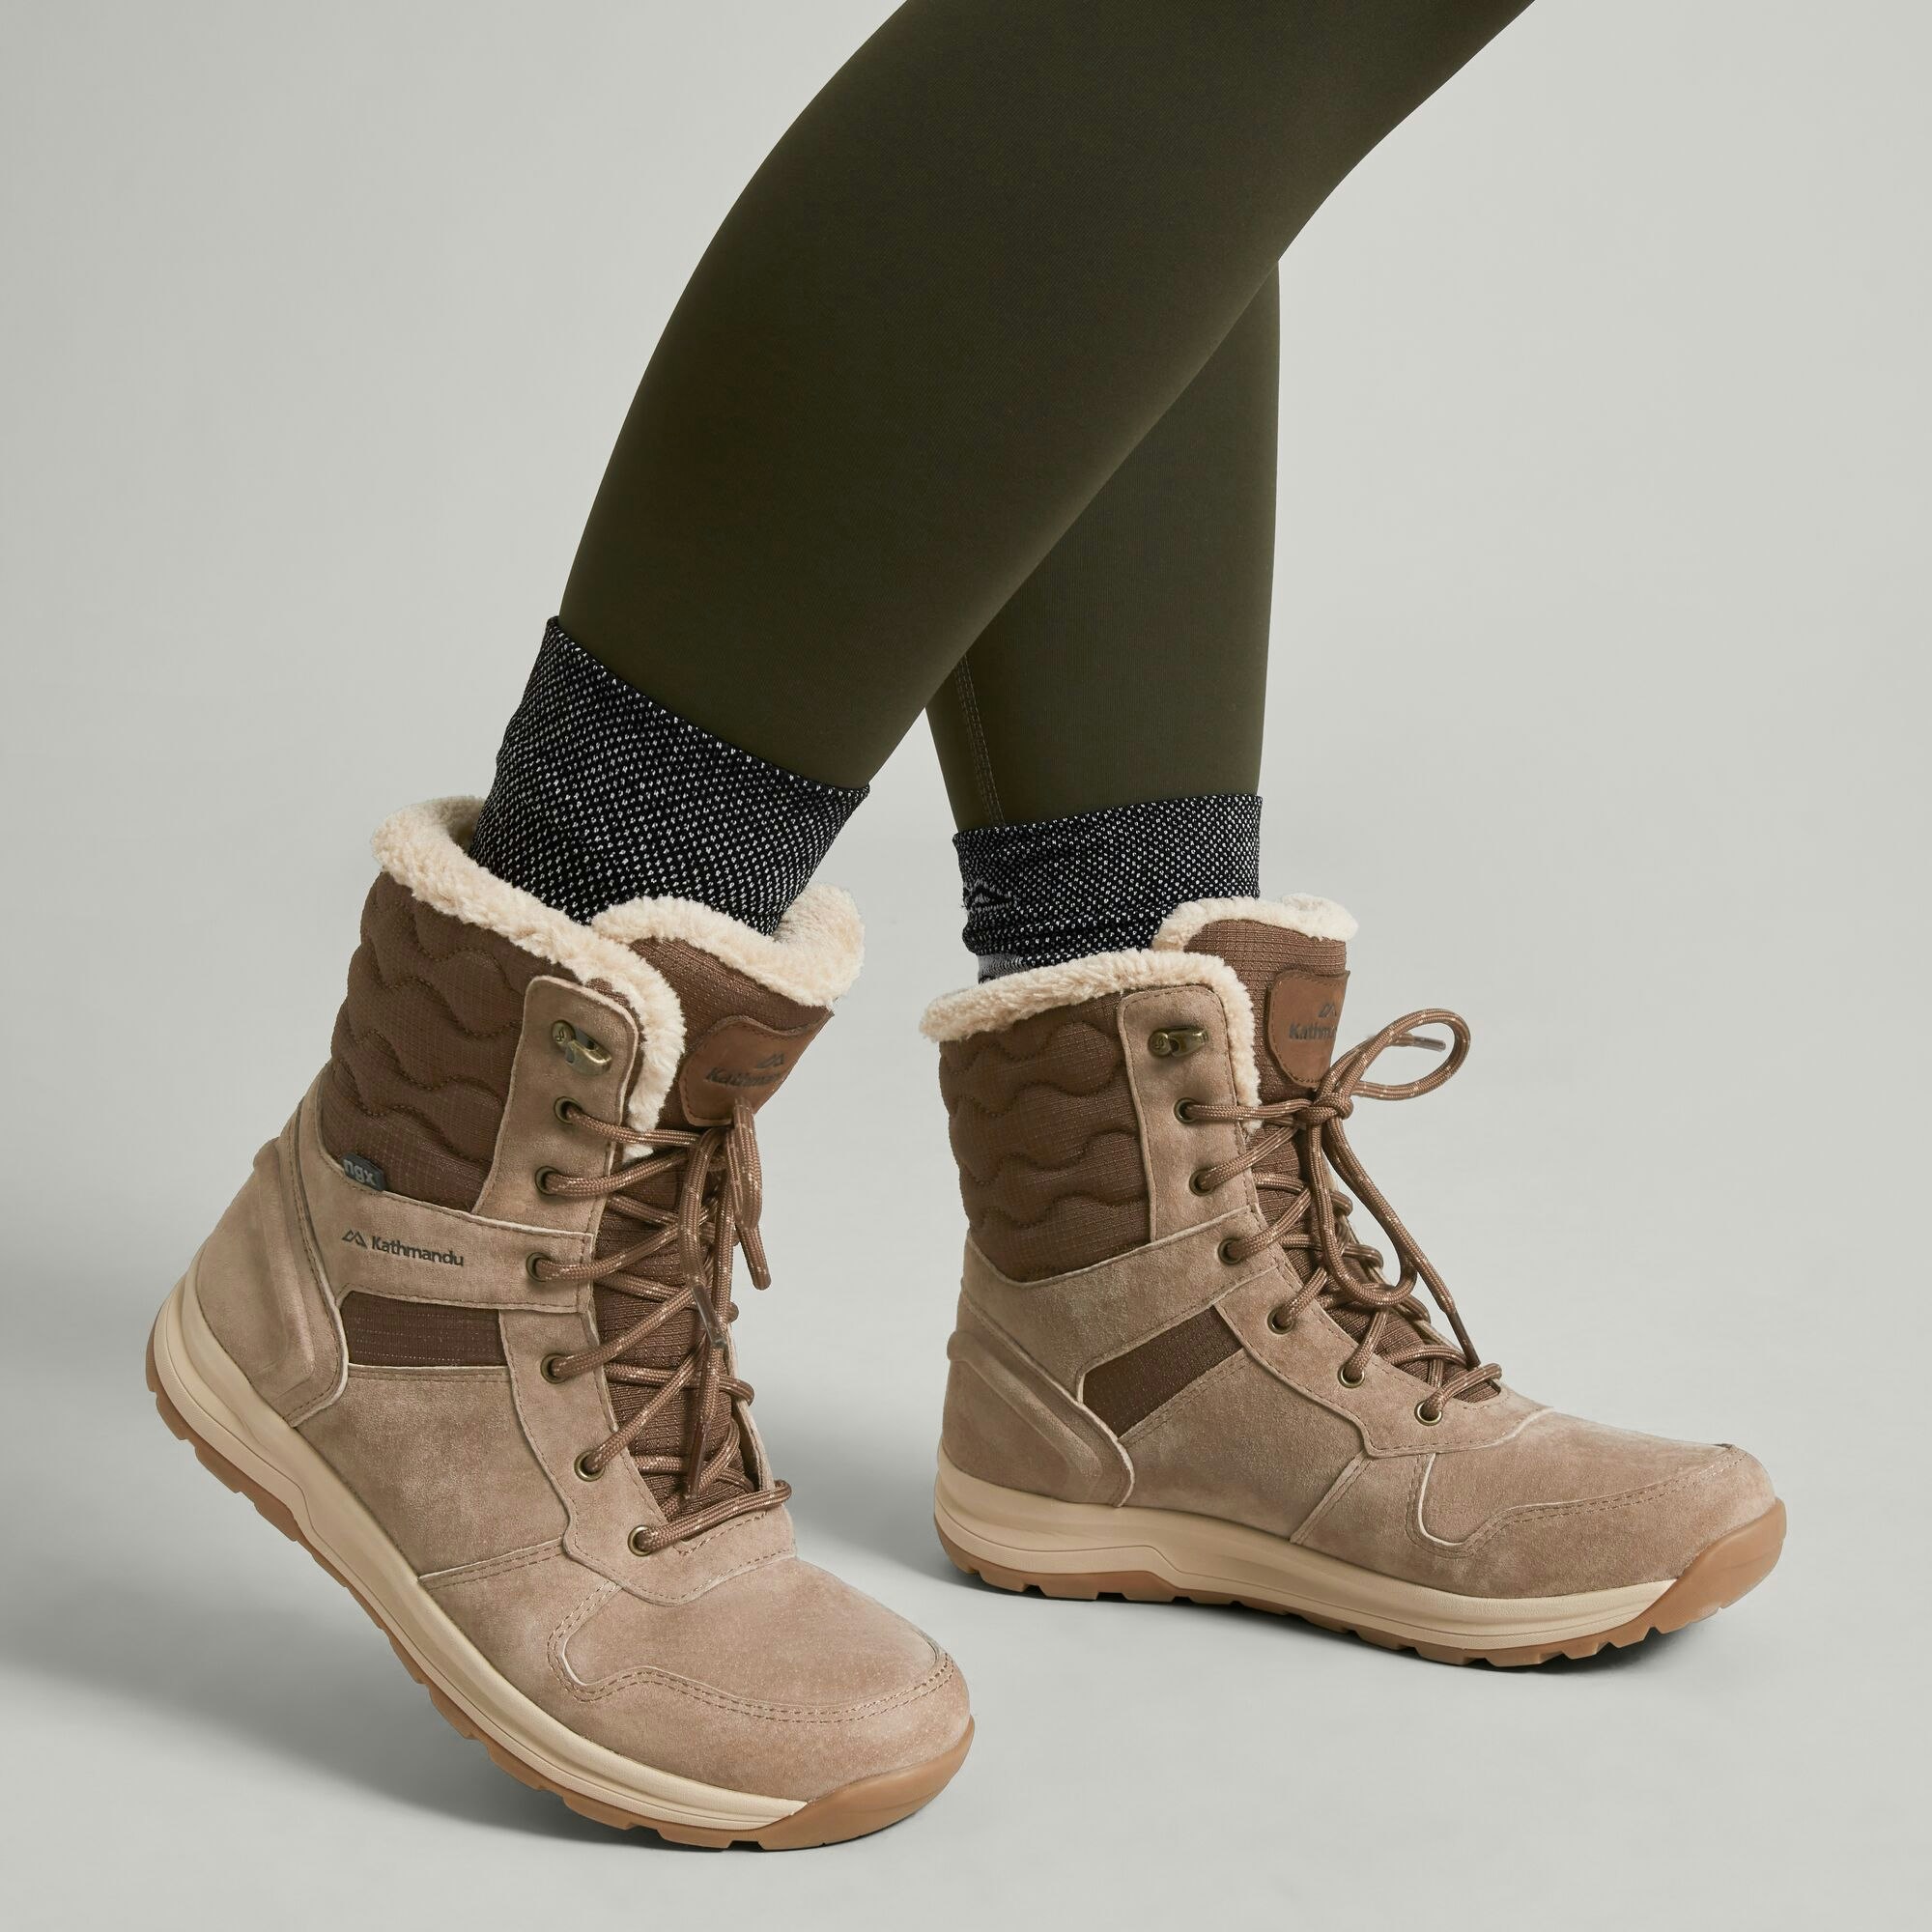 Women Winterburn Insulated Winter Ankle Boots